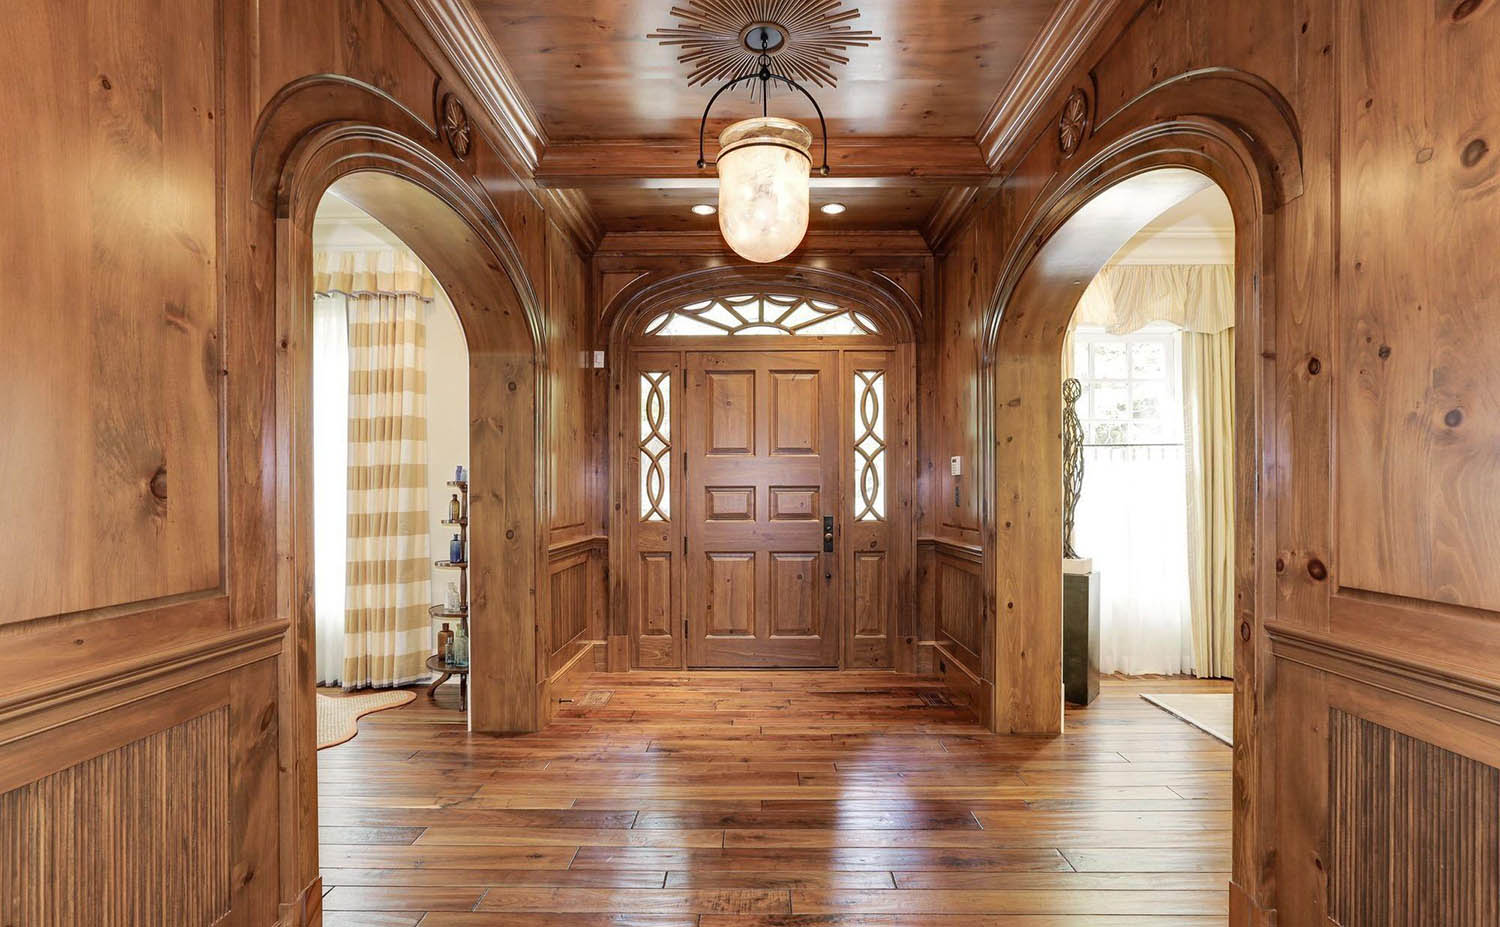 Hallway with all wood wall paneling and matching hardwood floors. Wood ceiling.